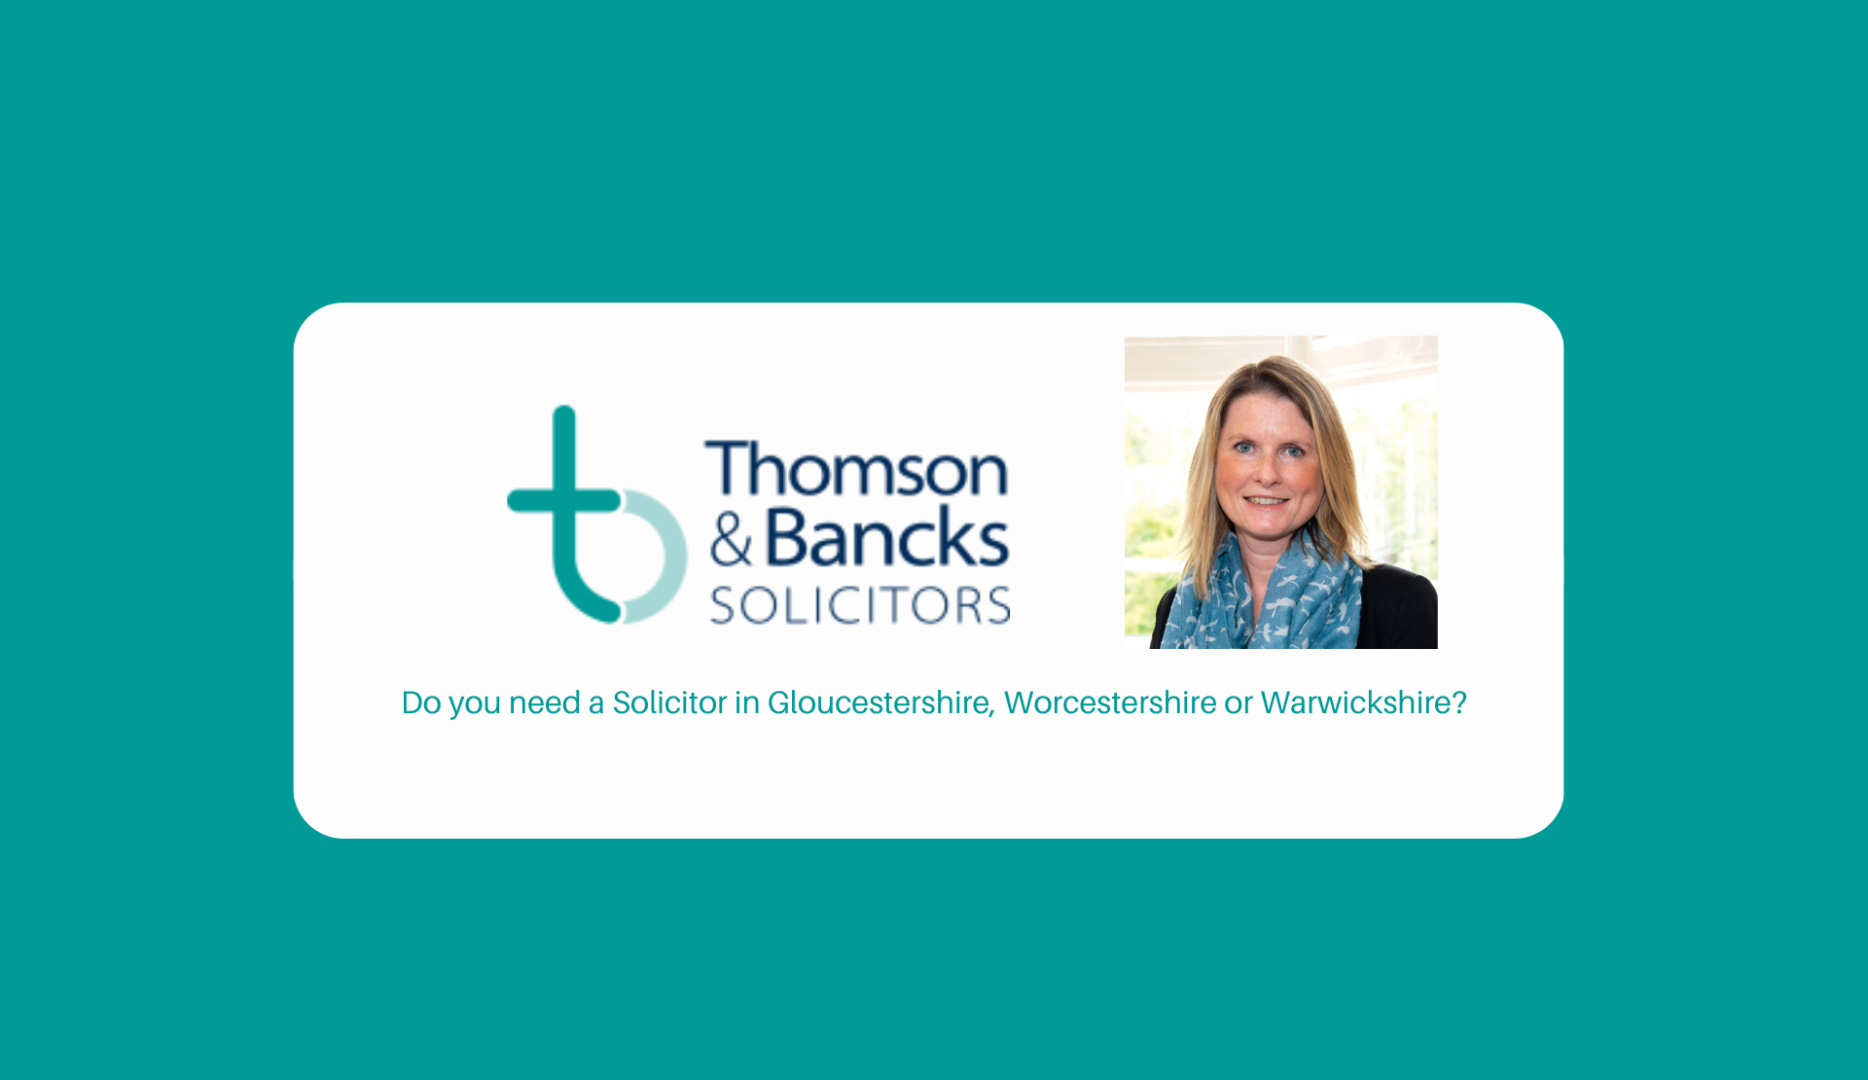 Thomson & Bancks Solicitors in Tewkesbury